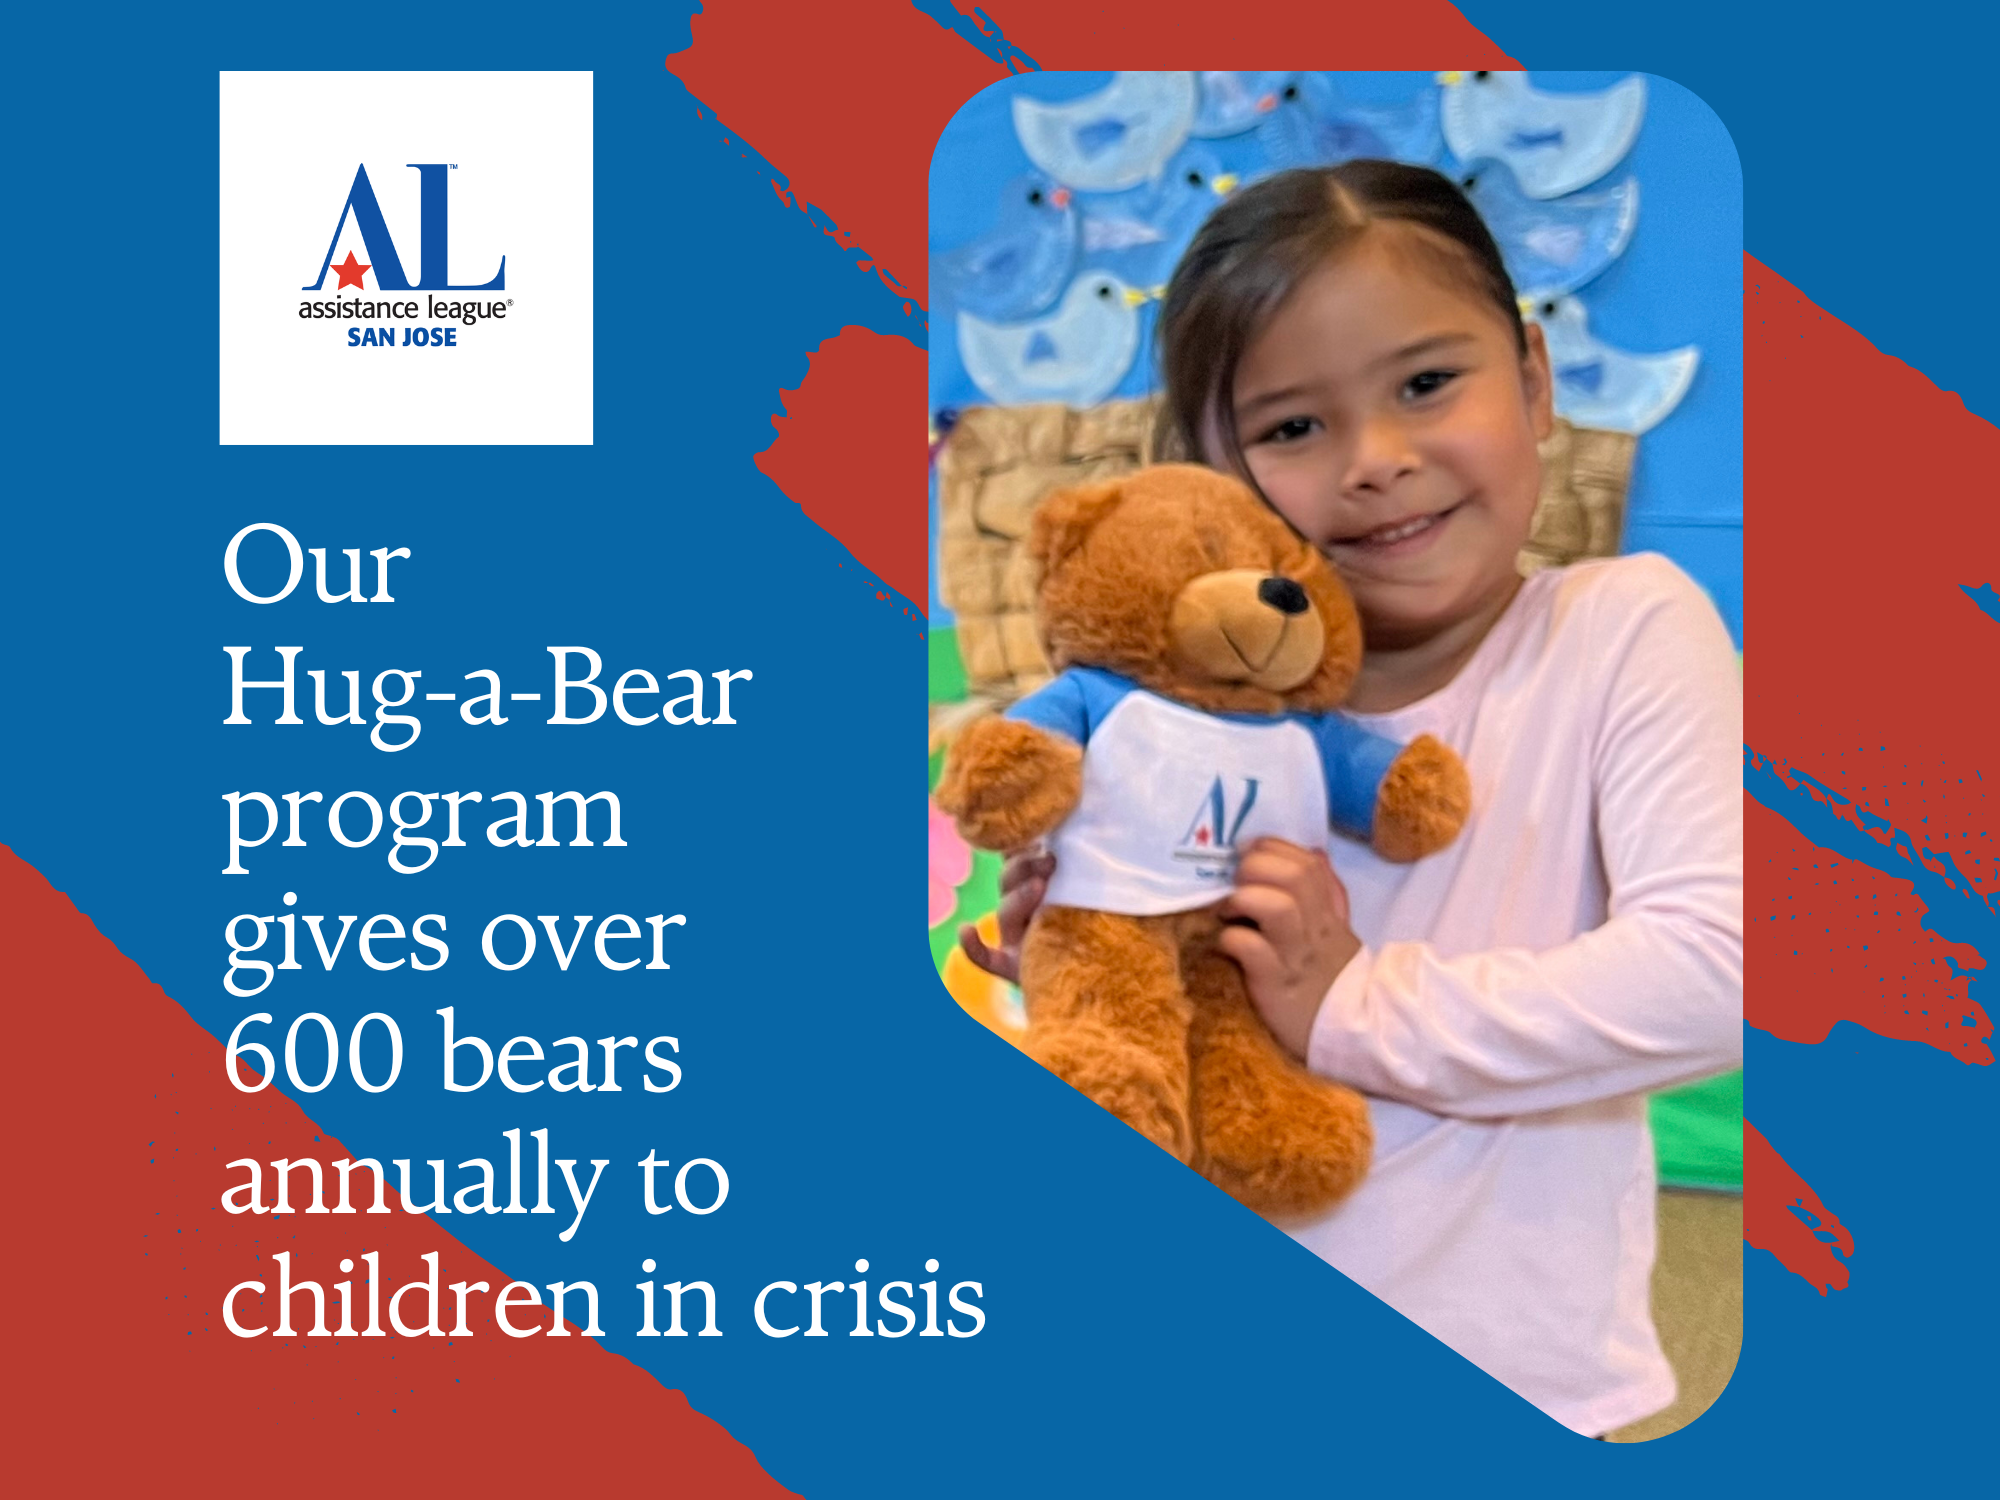 Our Hug-a-Bear program gives over 600 bears annually to children in crisis